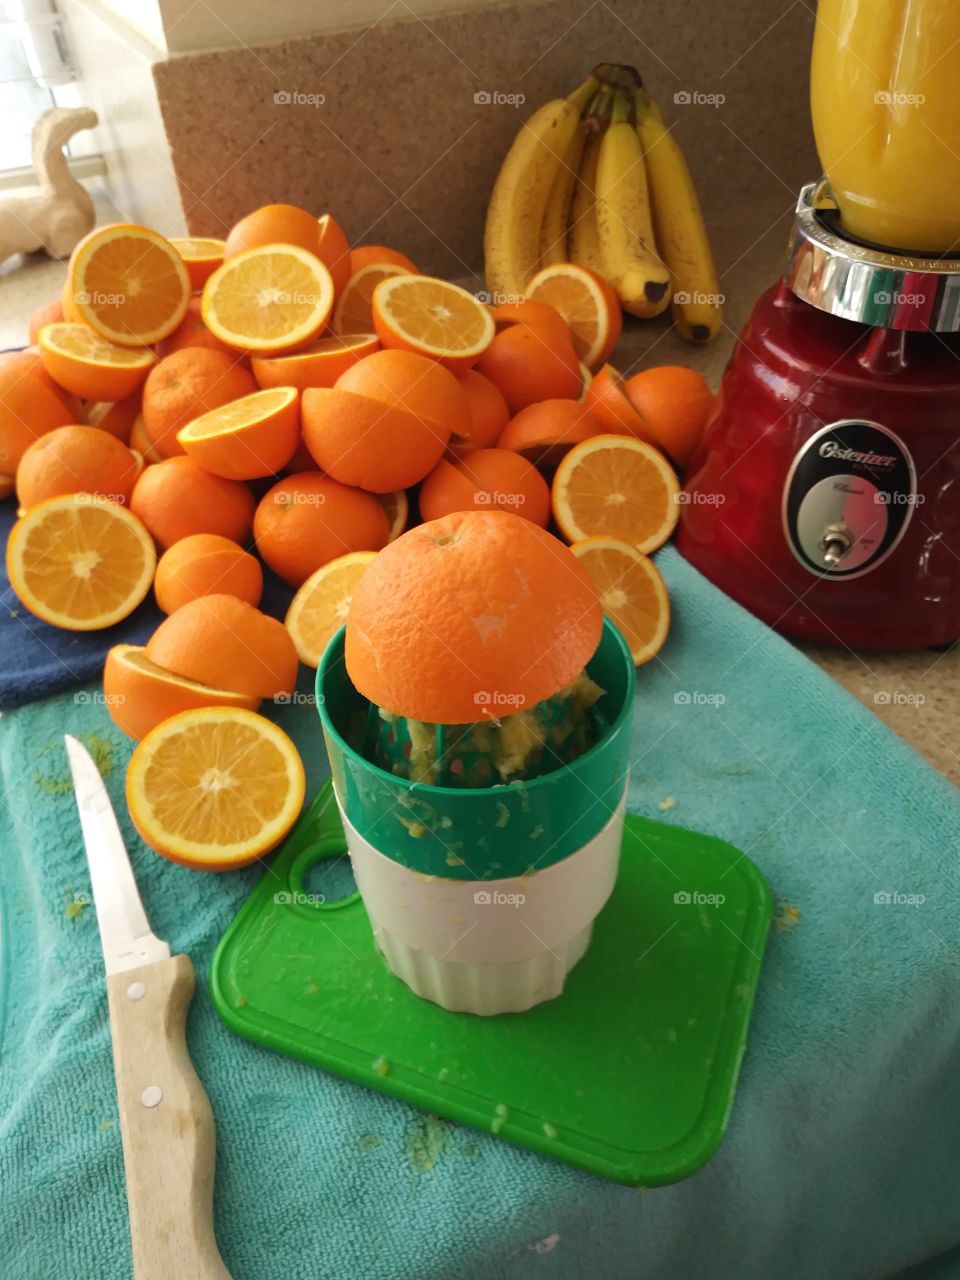 Fresh Squeezed Oranges and Bananas